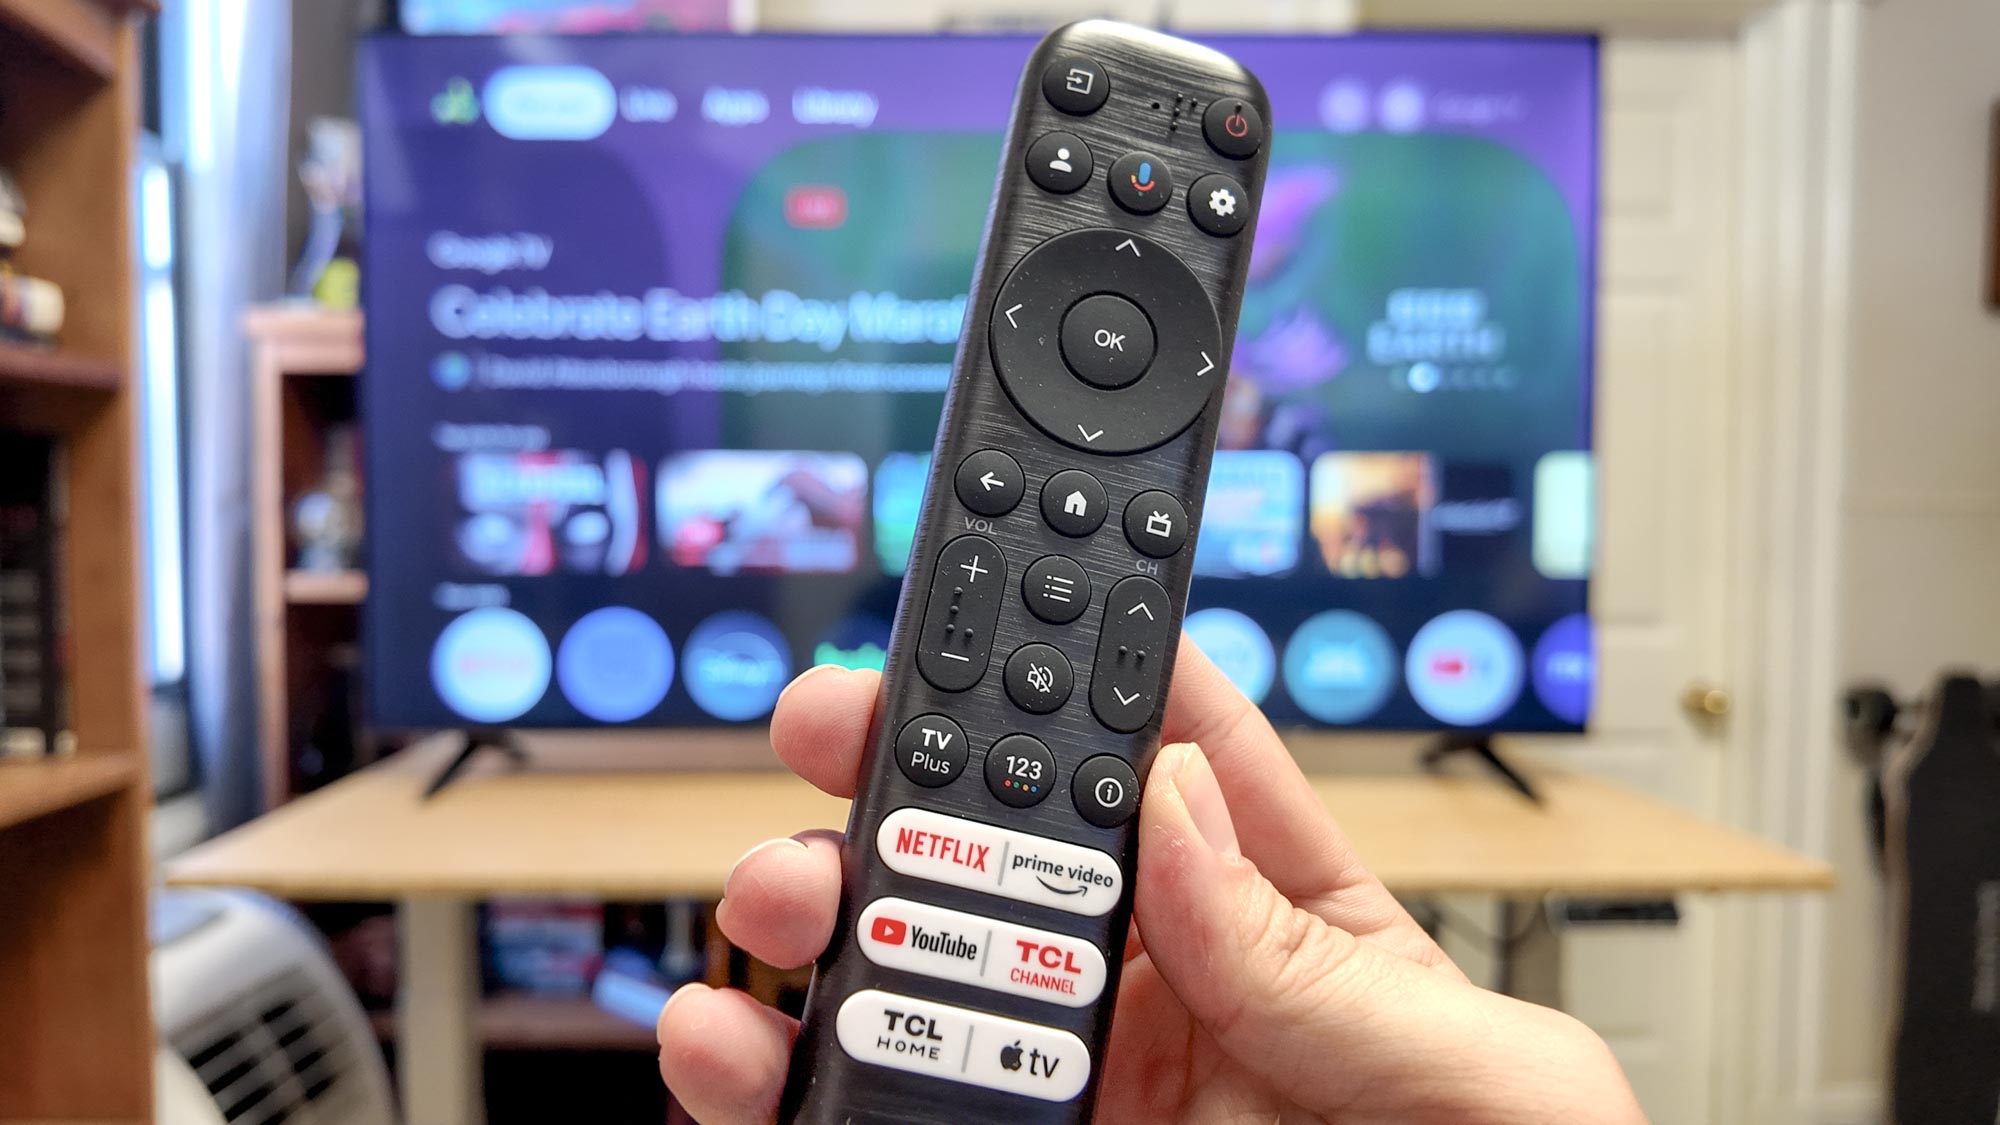 TCL S4 S-Class 4K TV (65S450G) remote shown held in hand